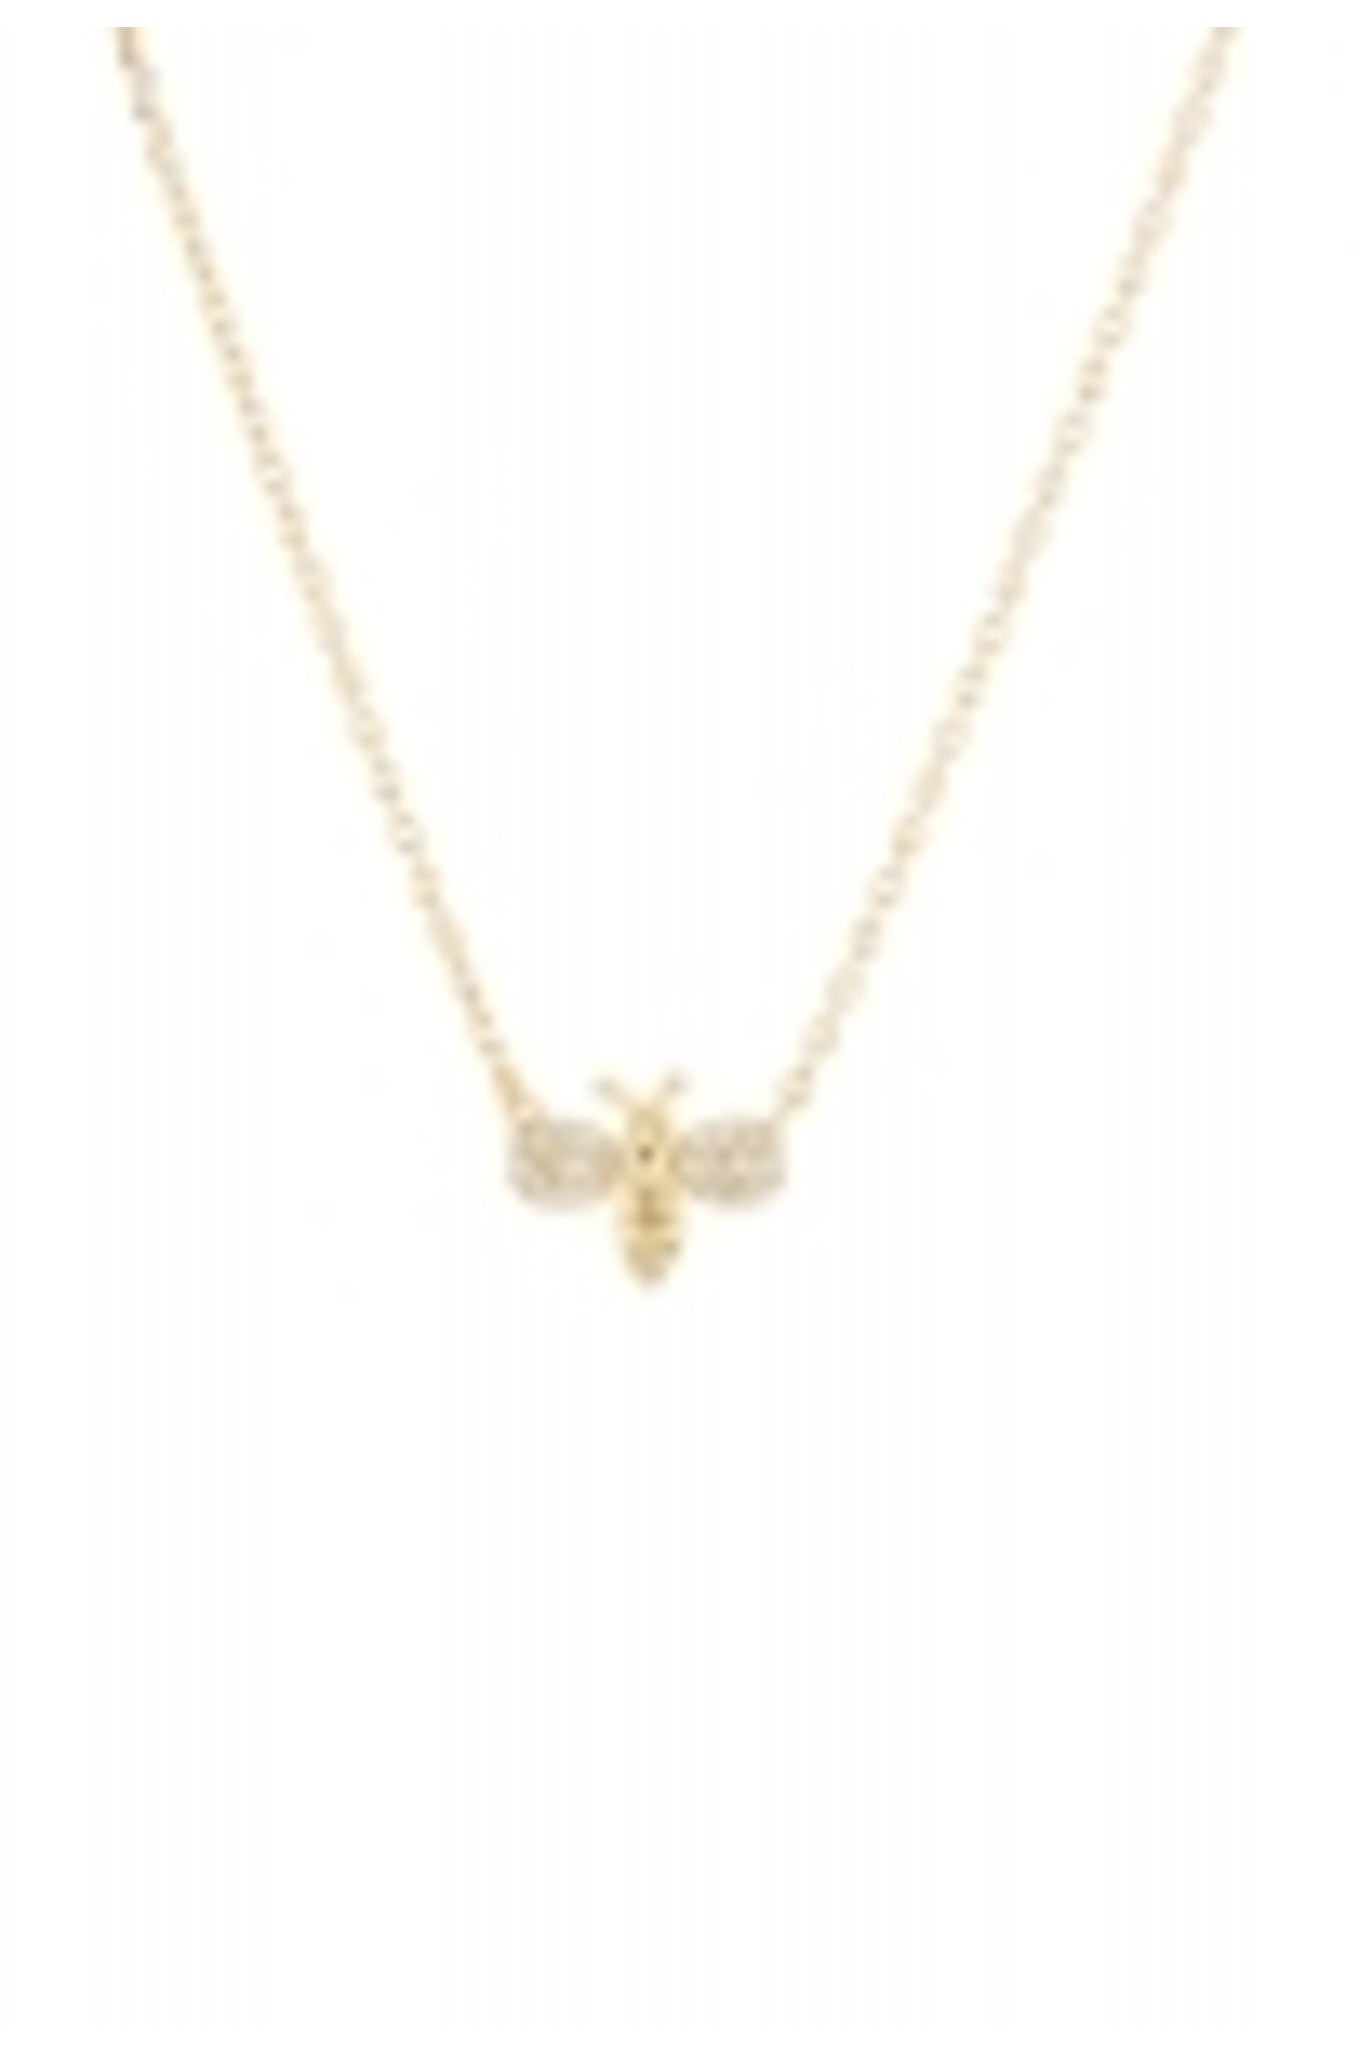 Gold Free Bee Necklace